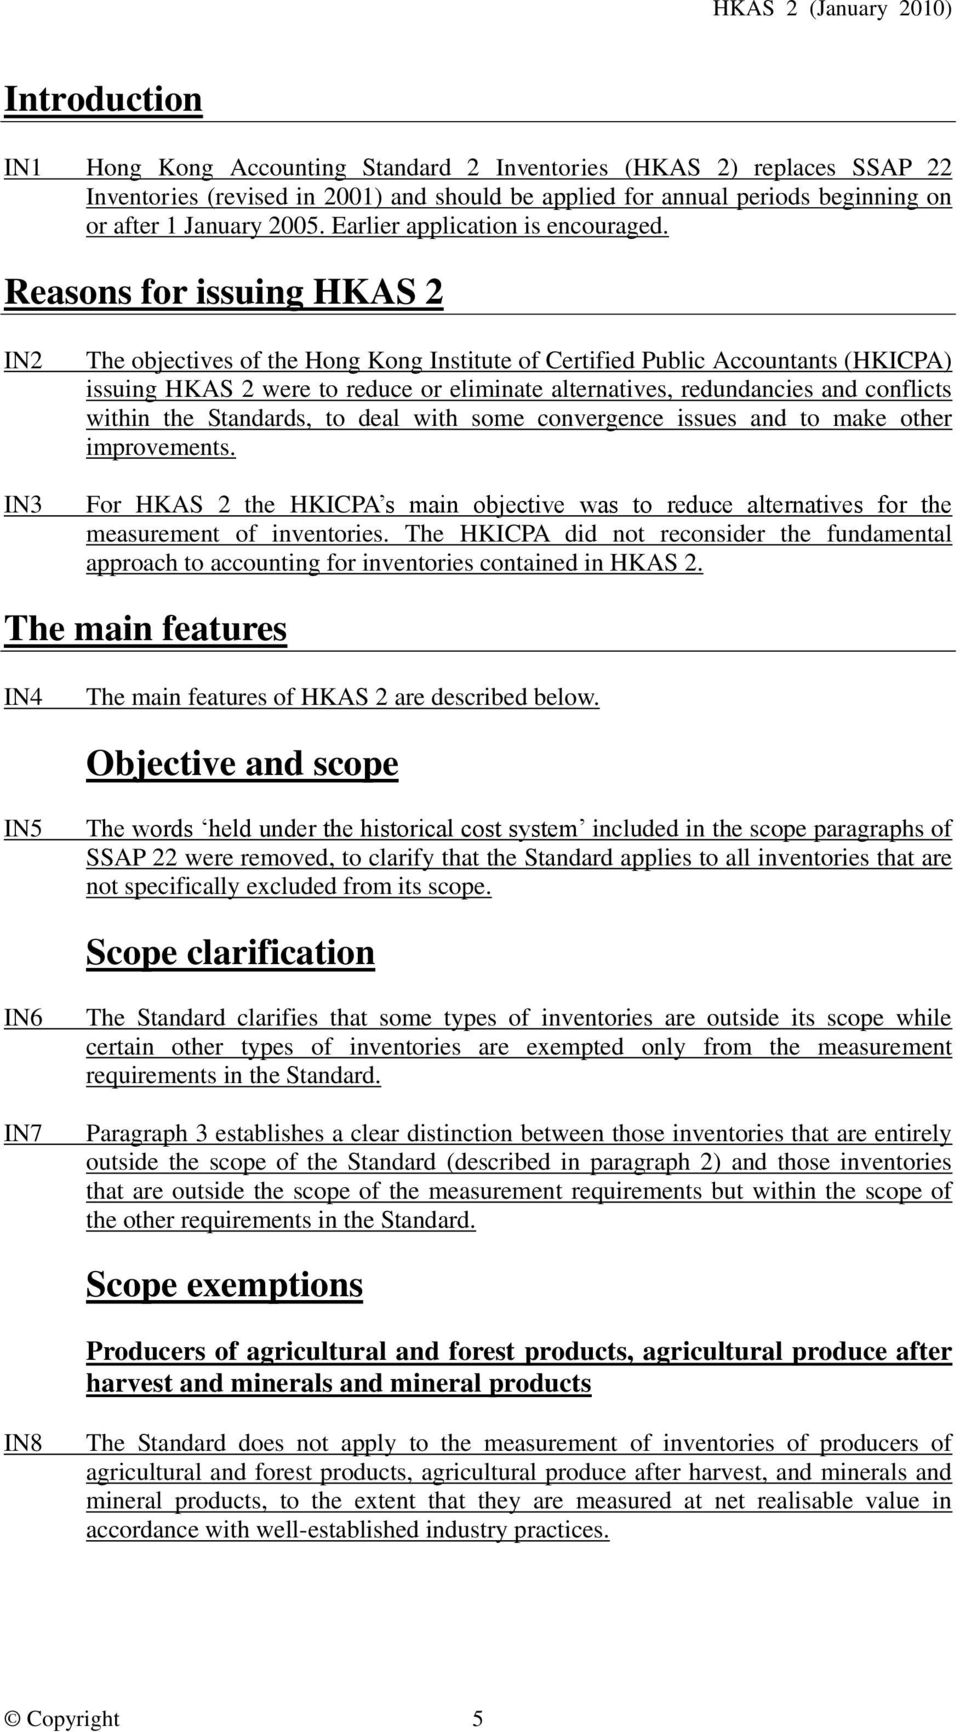 Reasons for issuing HKAS 2 IN2 IN3 The objectives of the Hong Kong Institute of Certified Public Accountants (HKICPA) issuing HKAS 2 were to reduce or eliminate alternatives, redundancies and